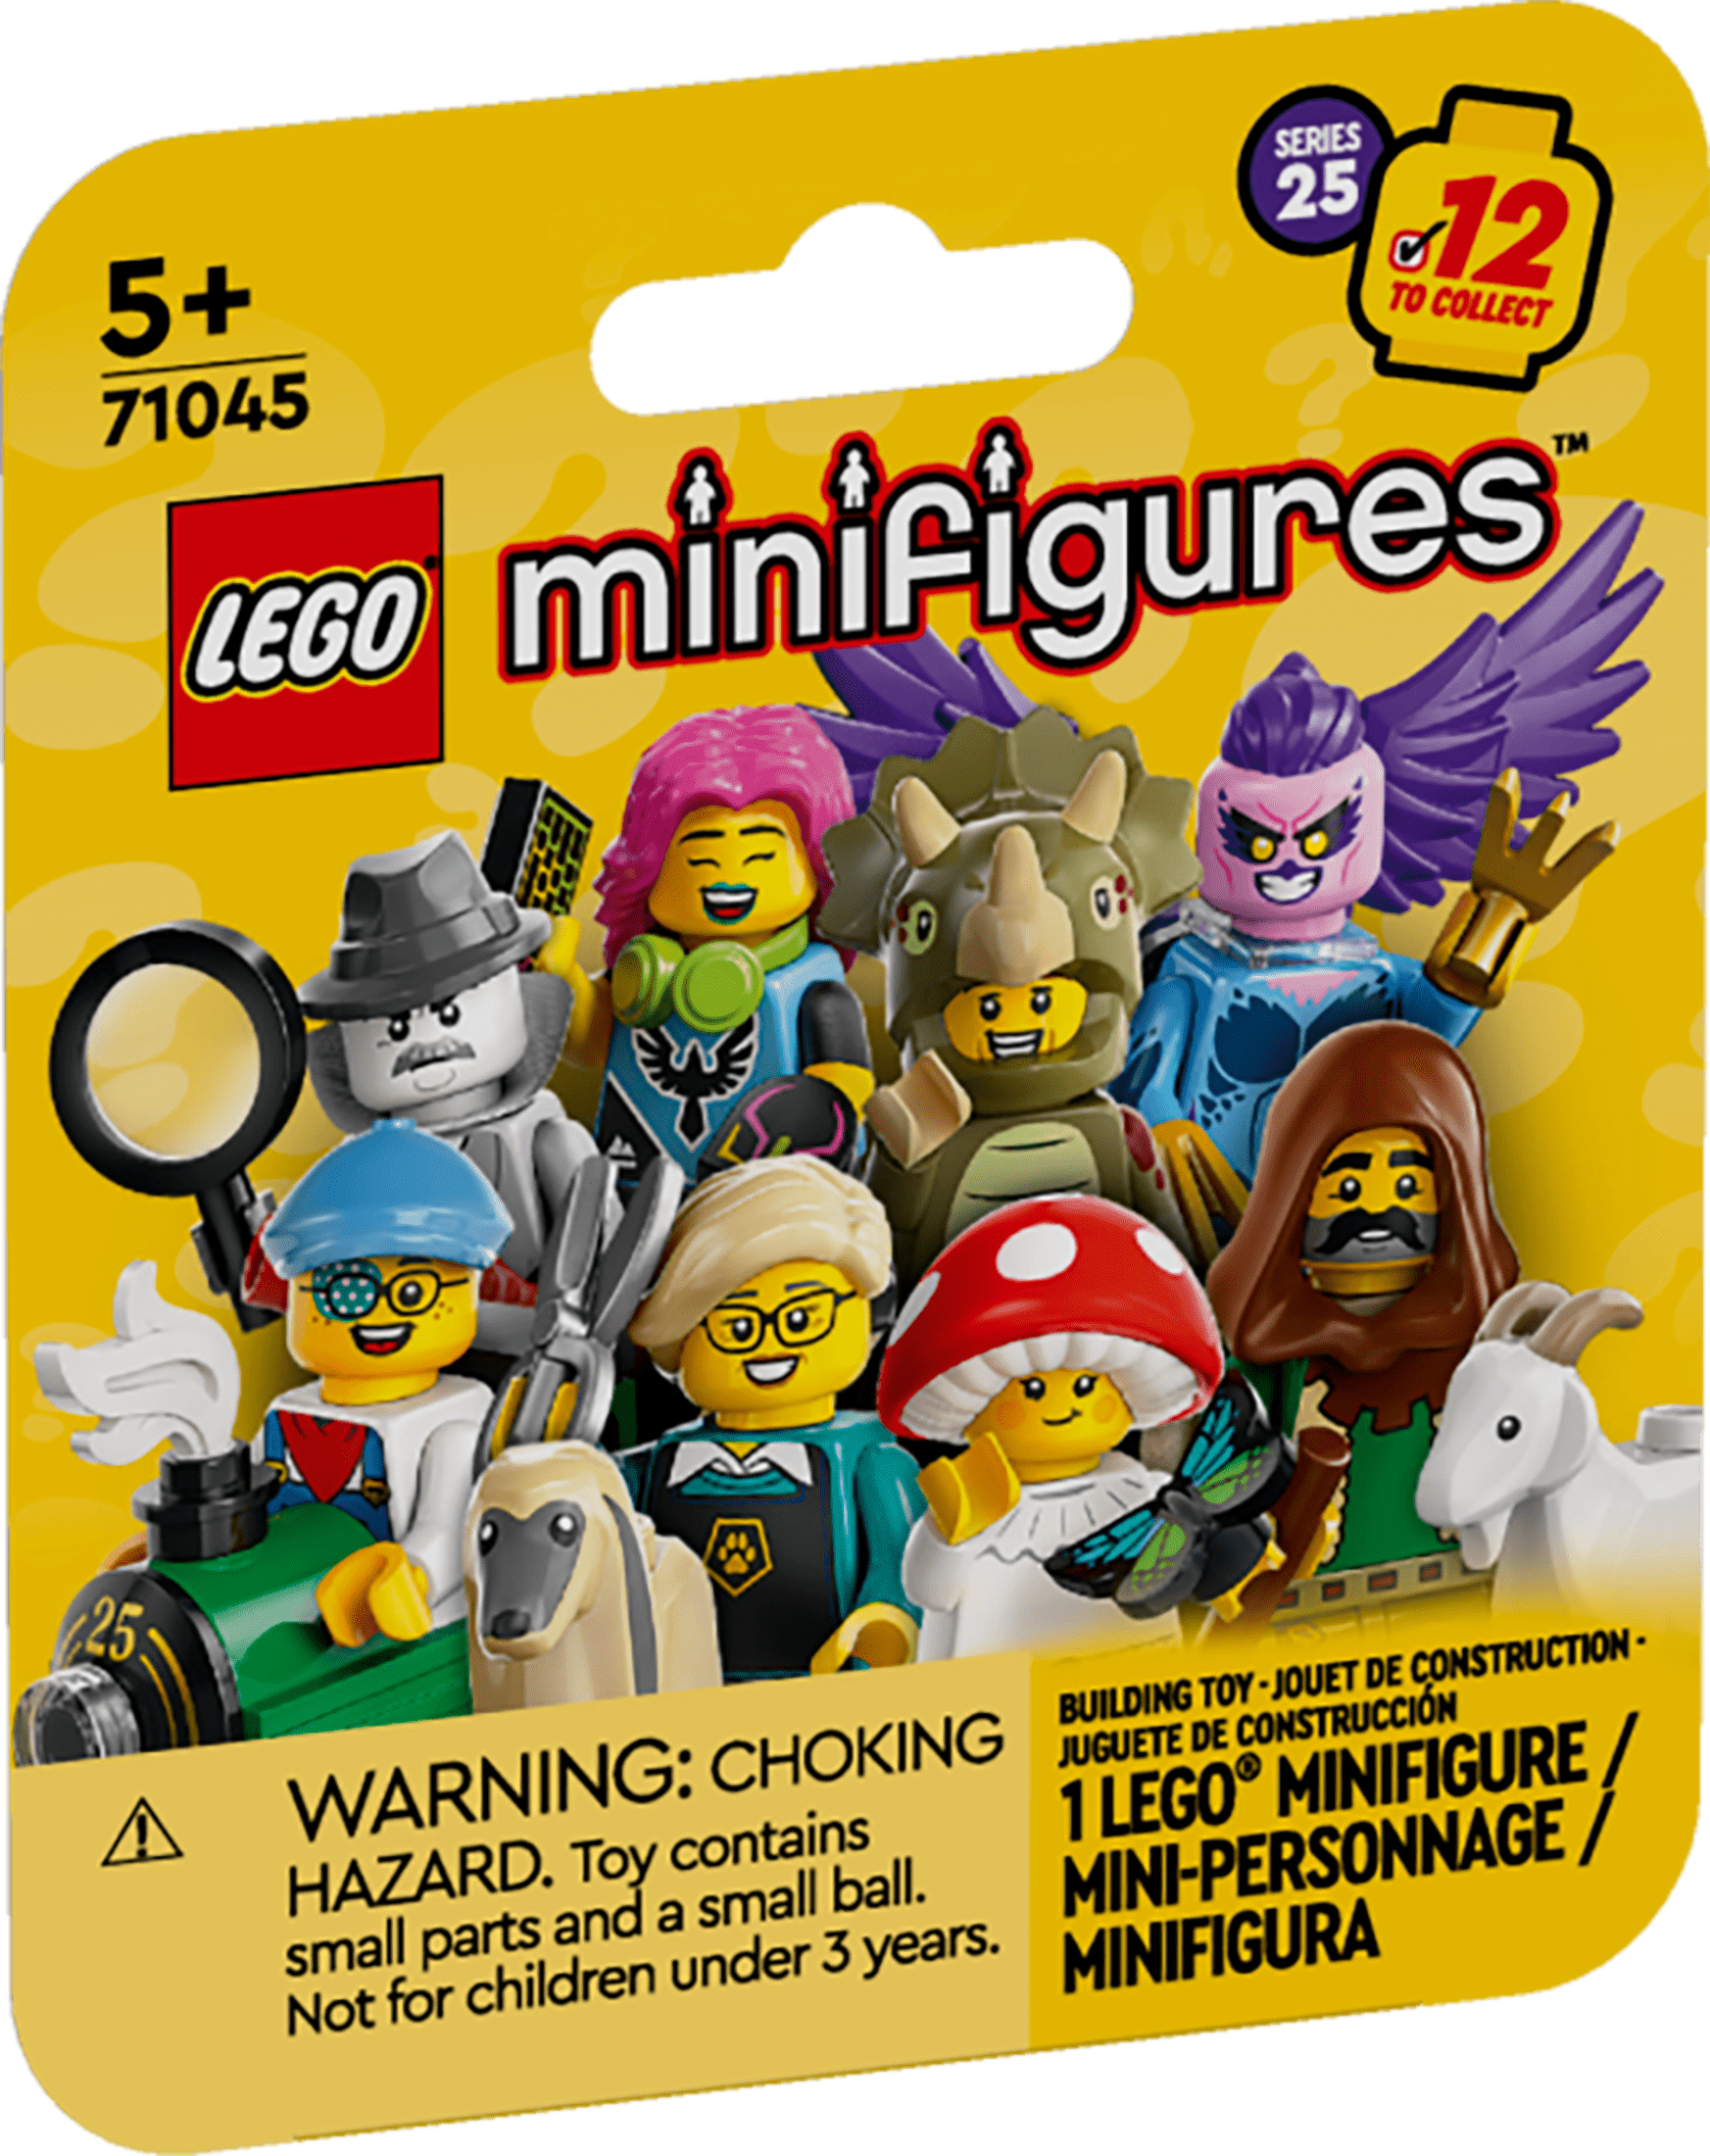 LEGO Minifigures Series 25 Collectible Figures, Surprise Adventure Toy  Building Set for Independent Play, Gift Idea for Boys, Mystery Figures,  Girls